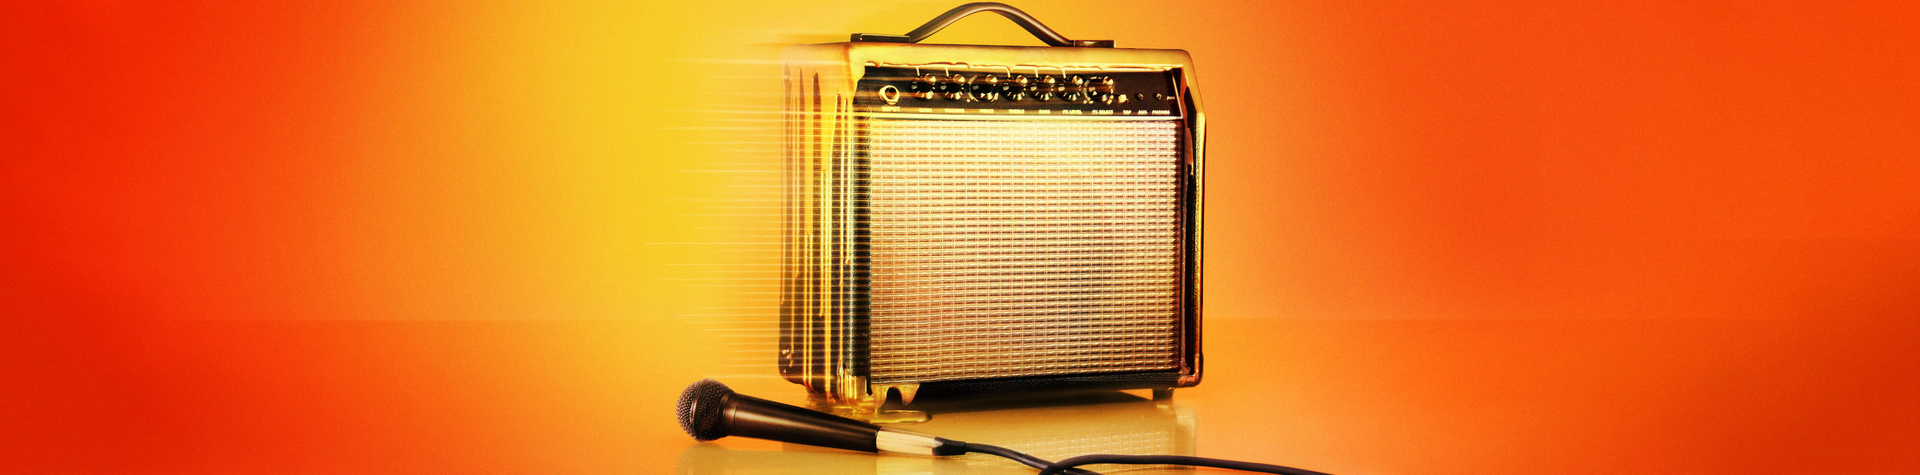 view of a classic portable speaker with michophone